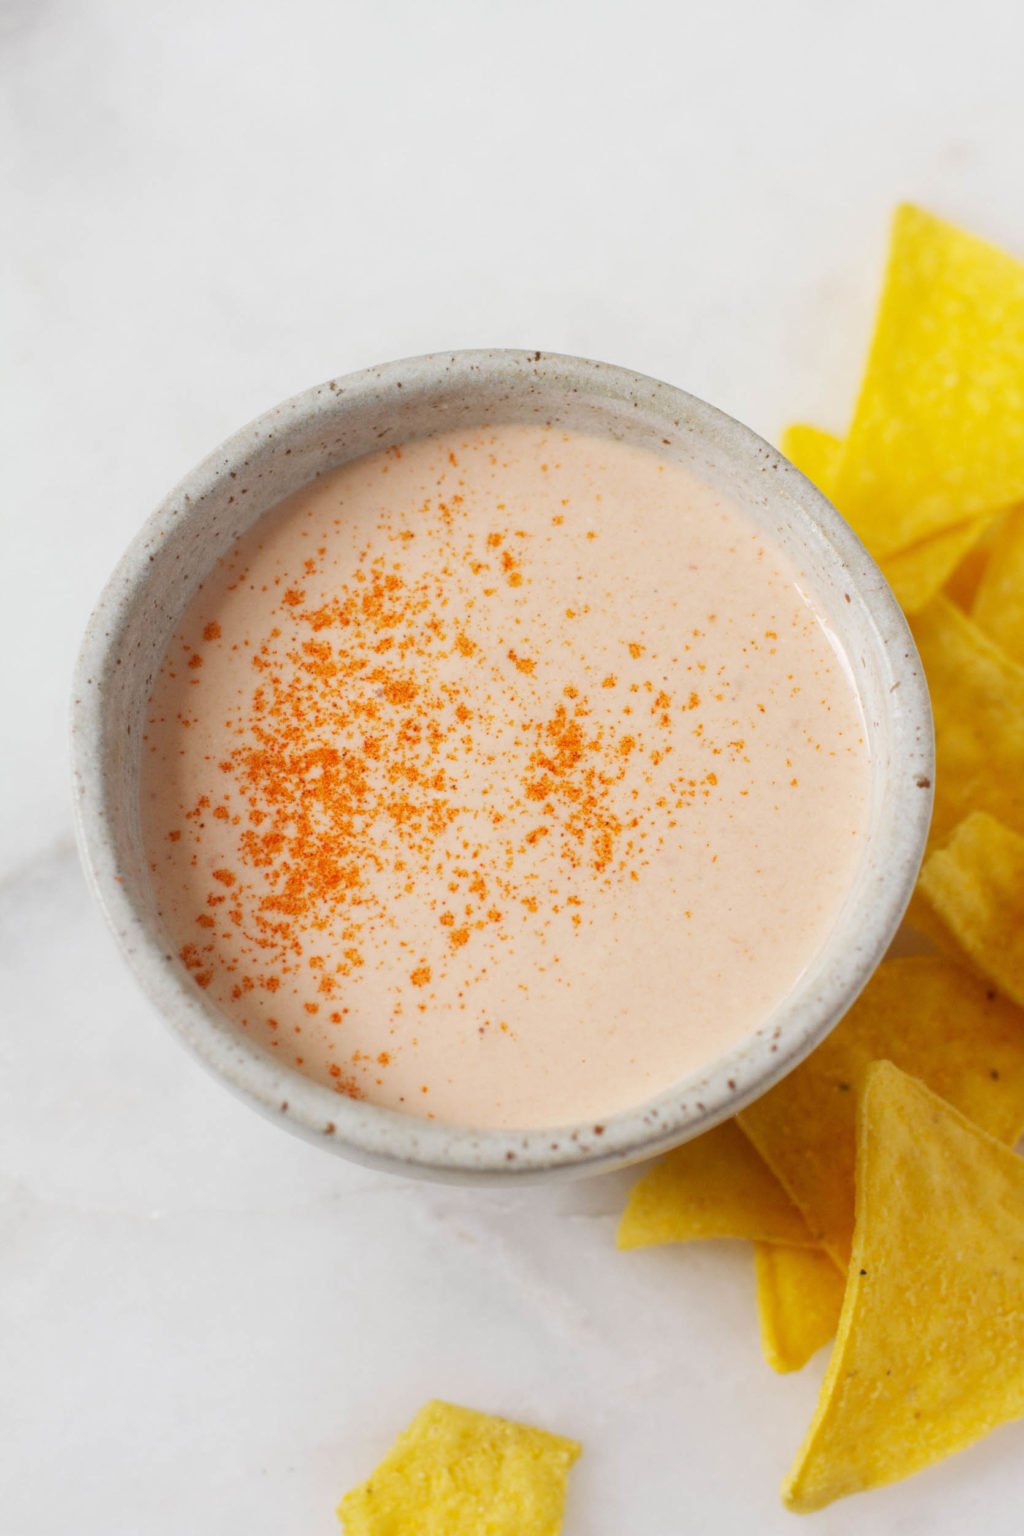 A creamy vegan queso sauce is dusted with smoked paprika and served alongside chips.